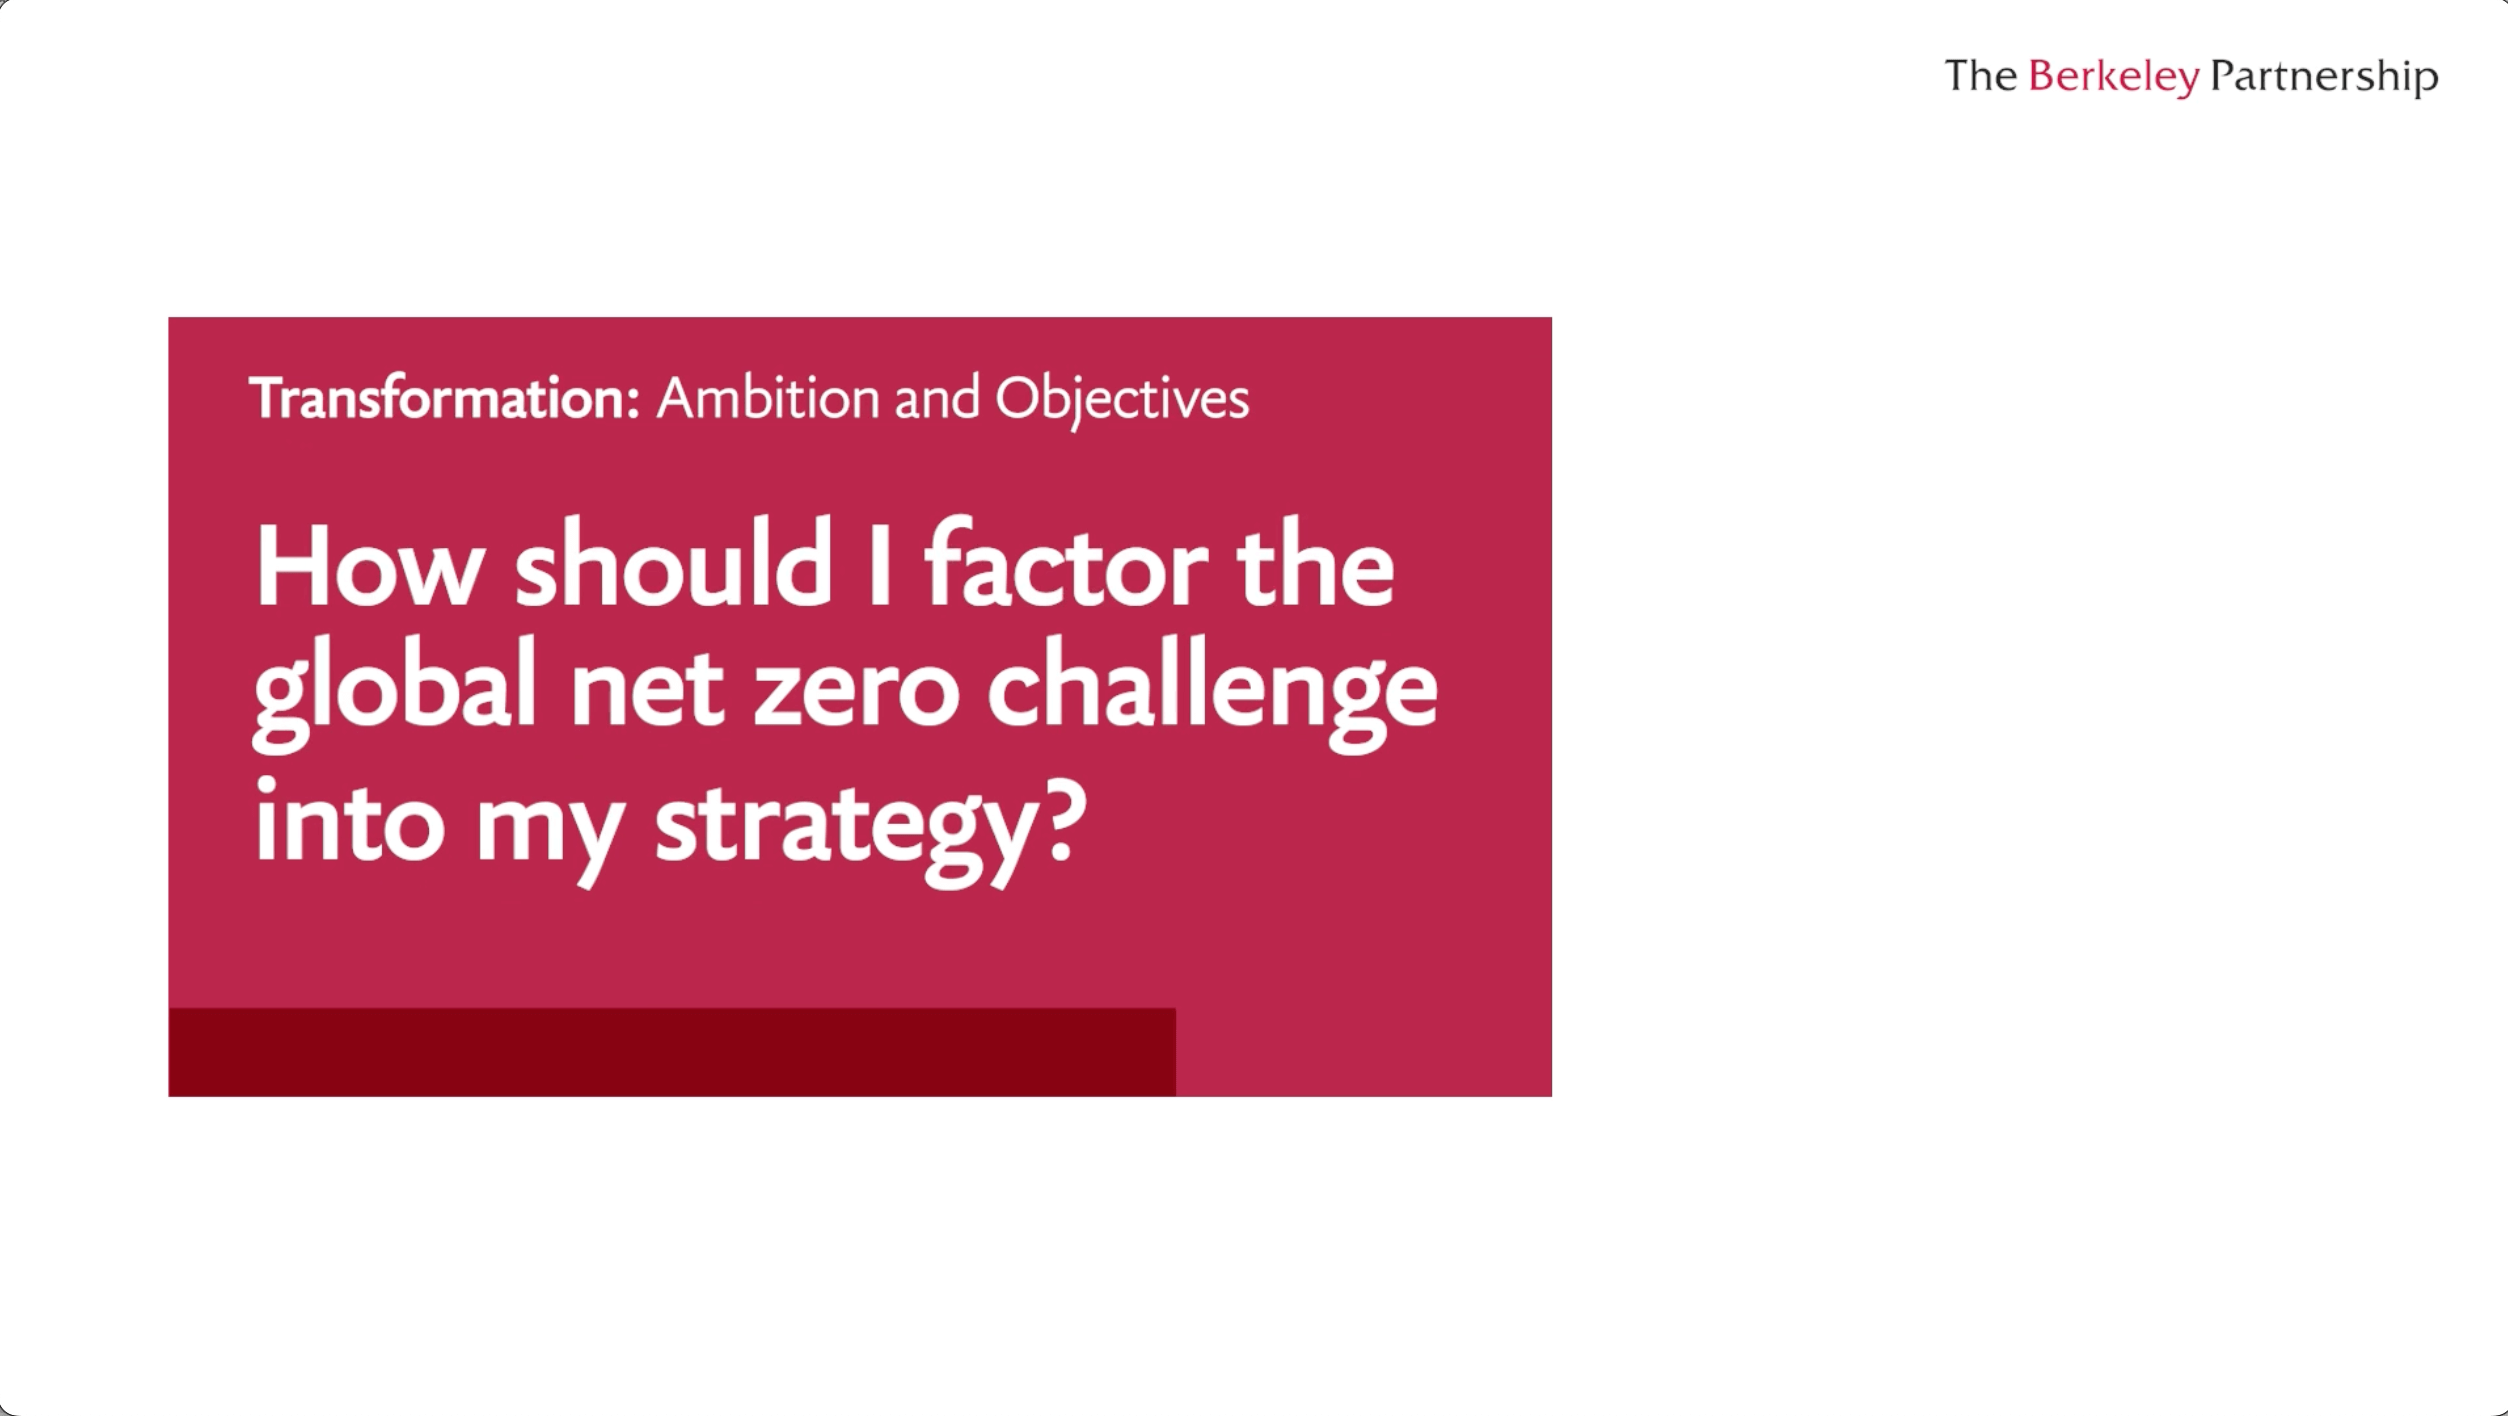 How should I factor the global net zero challenge into my strategy?